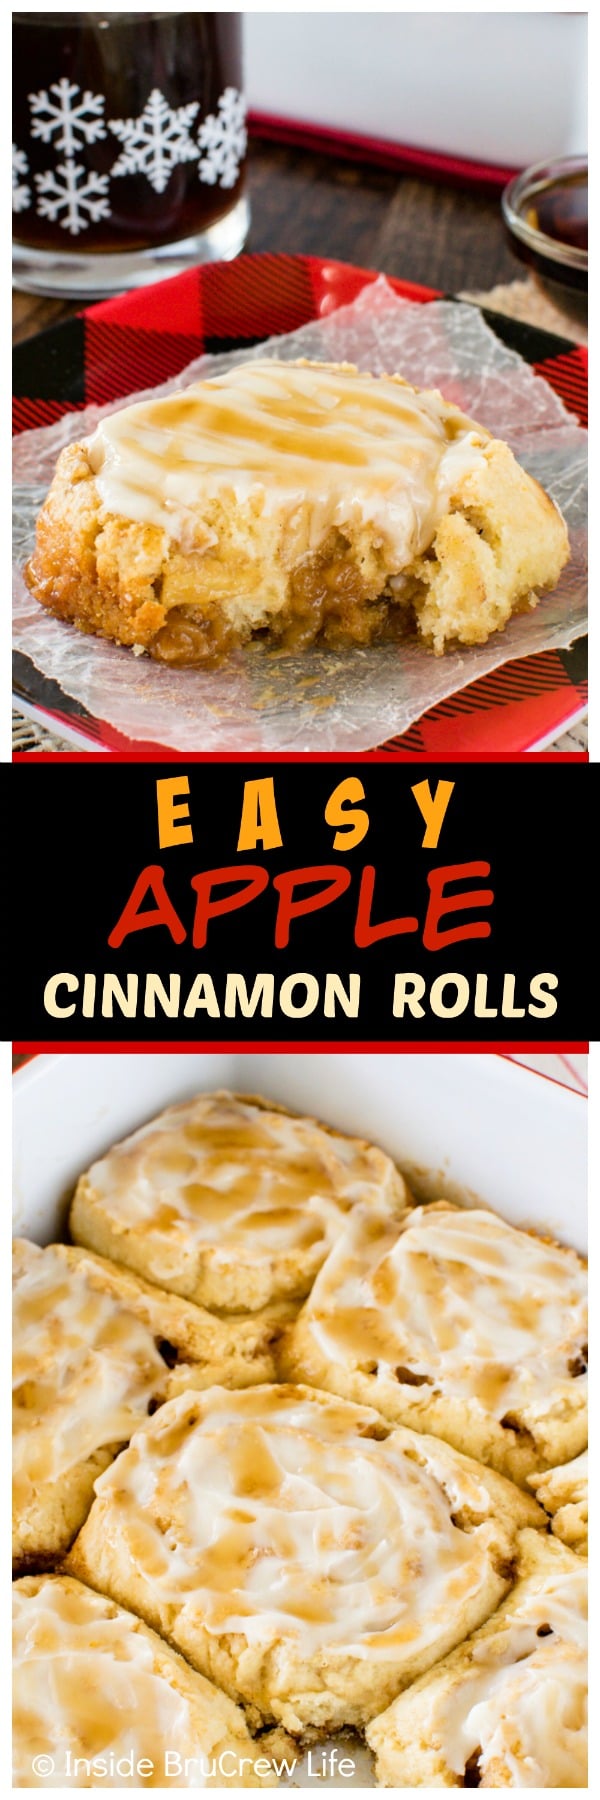 Easy Apple Cinnamon Rolls - soft fluffy rolls filled with cinnamon sugar apples & topped with a gooey frosting is a great way to start the day. Great breakfast recipe. 